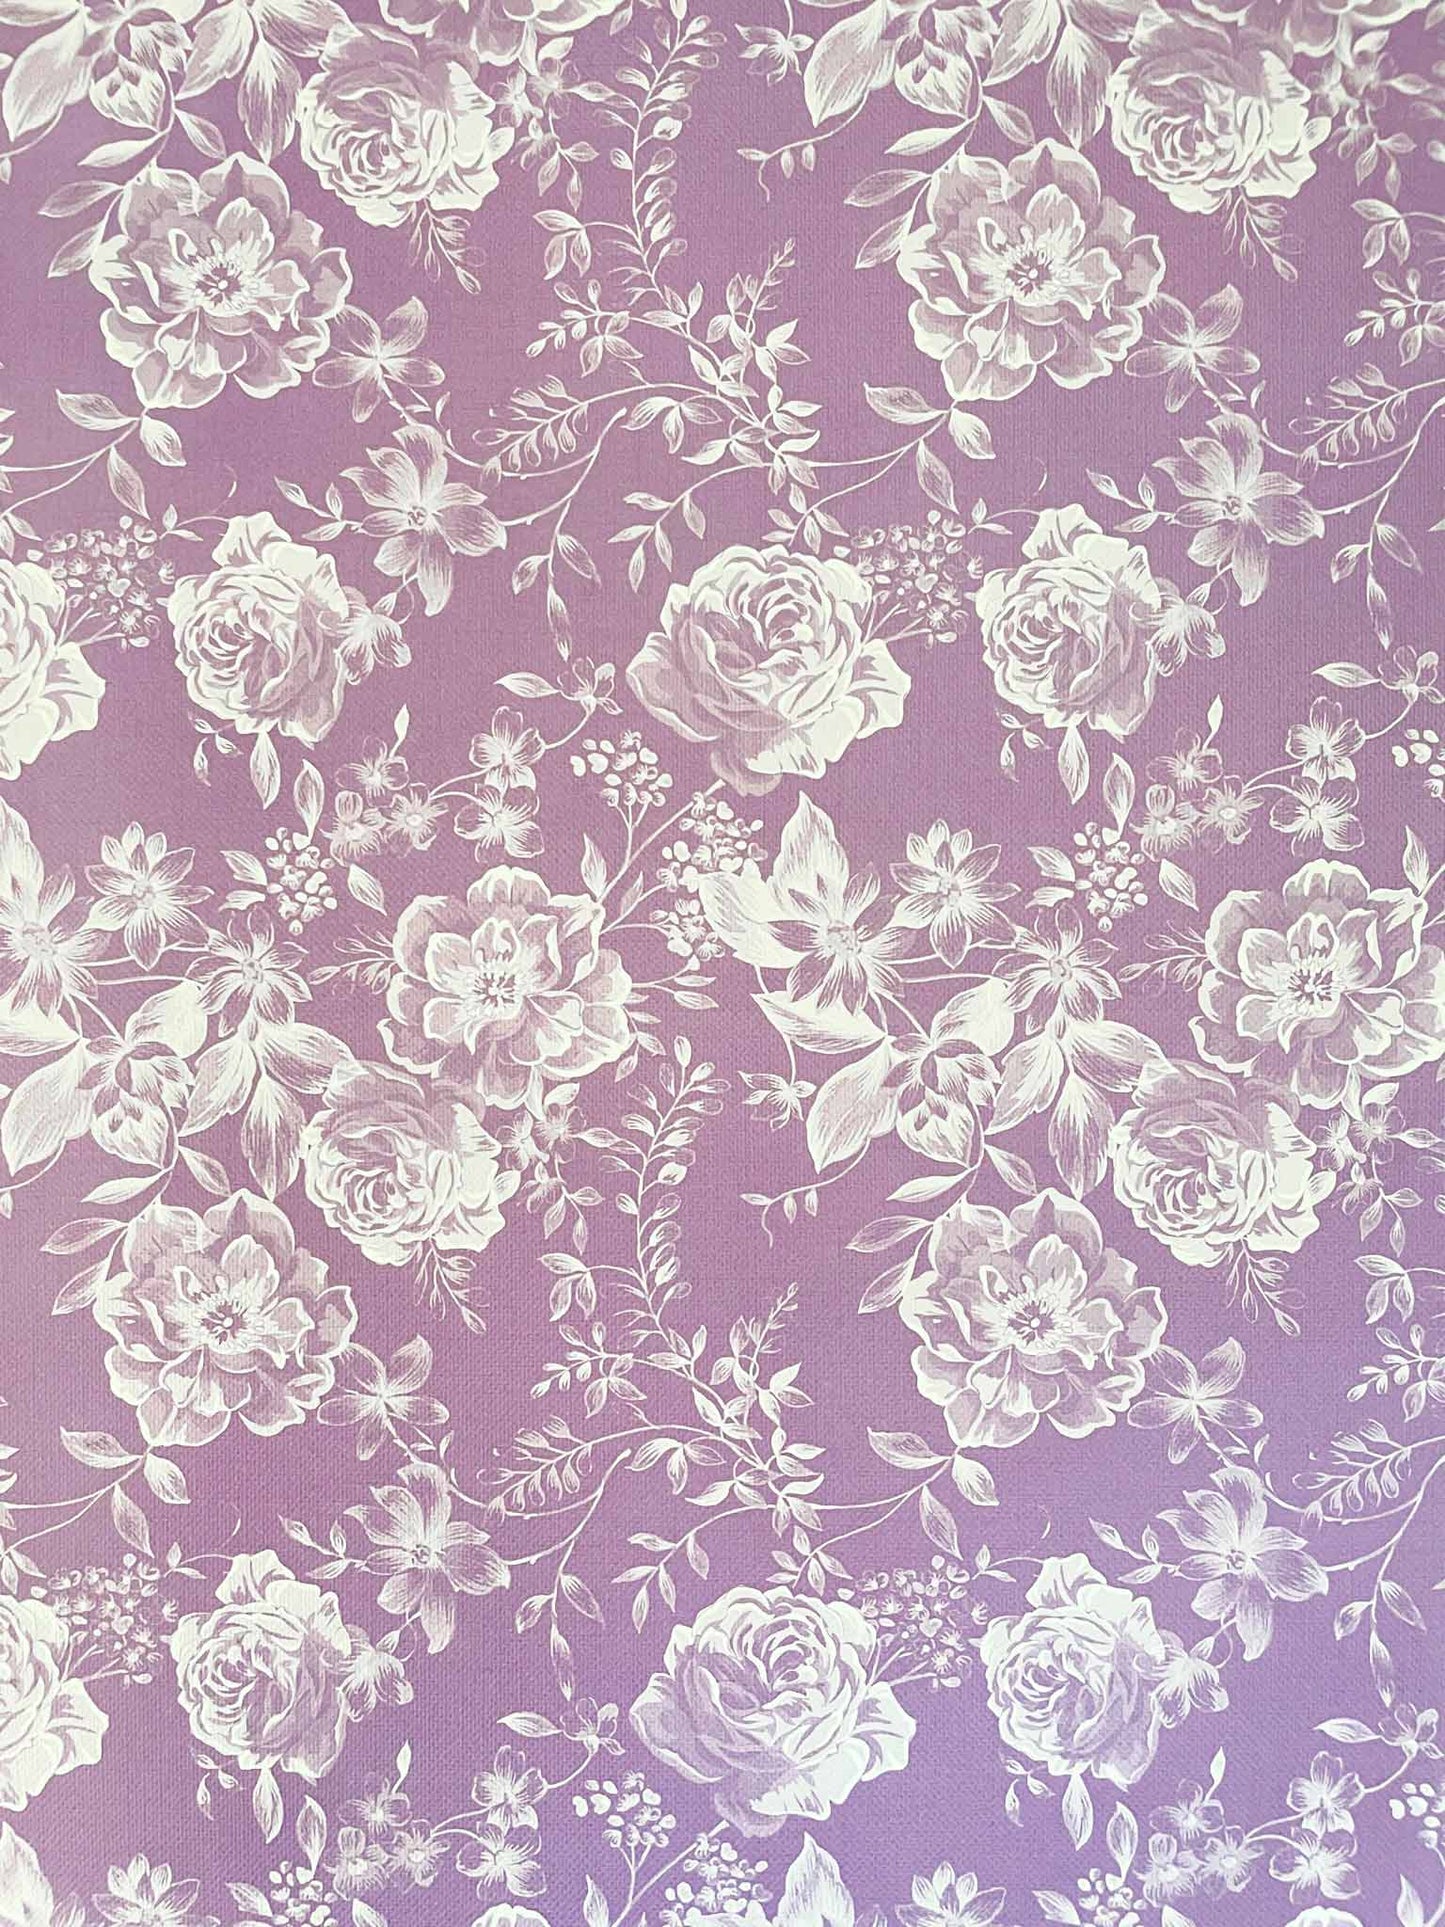 lois-plum-floral-patterned-paper-purple-and-white